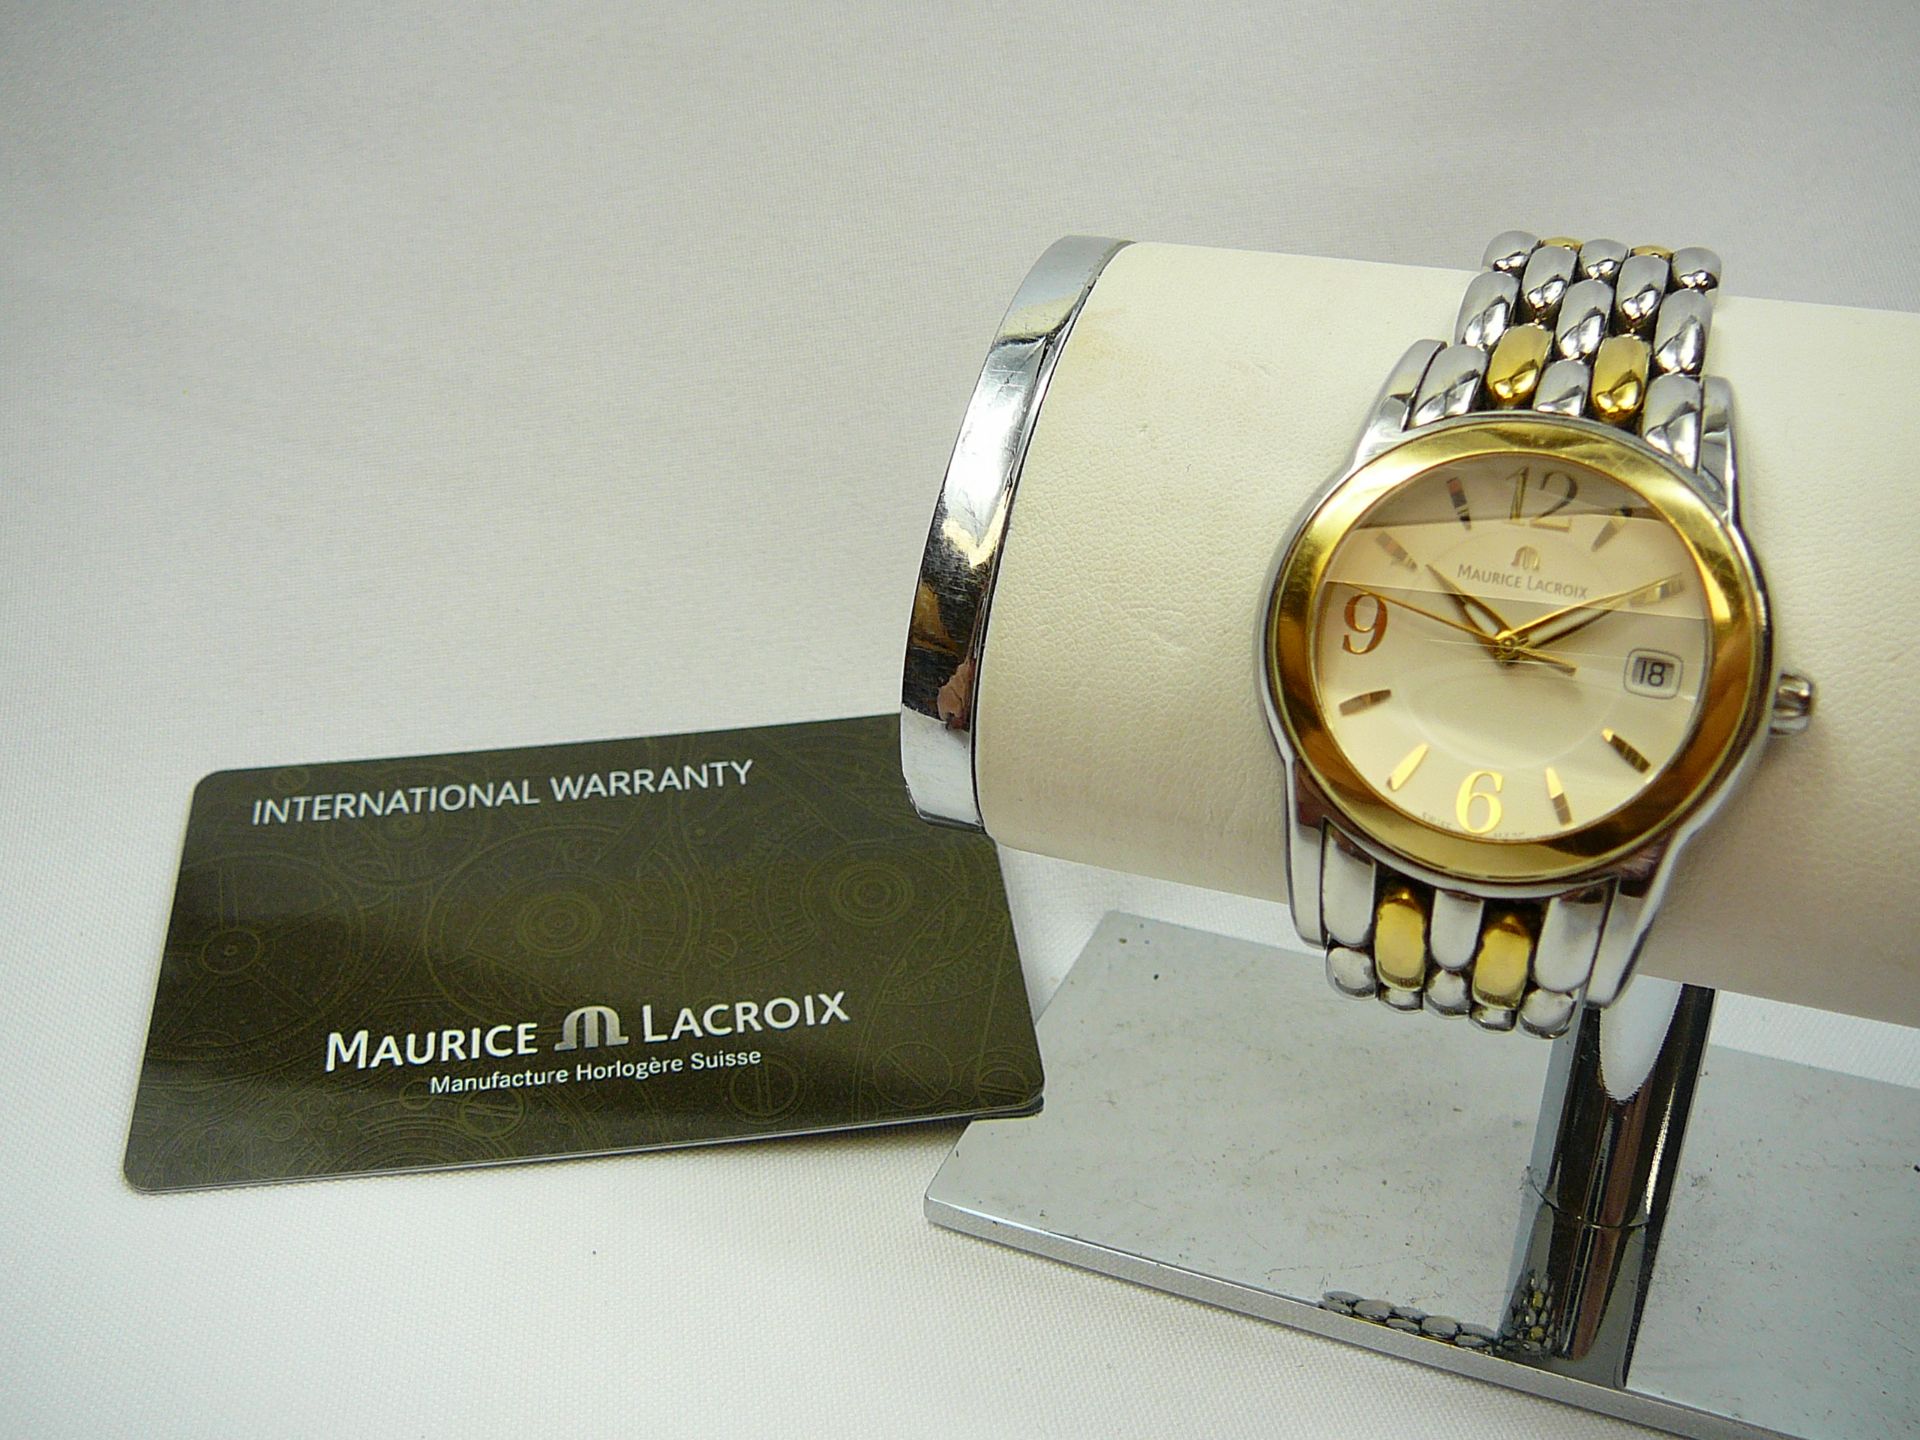 Gents Maurice Lacroix Wrist Watch - Image 2 of 3